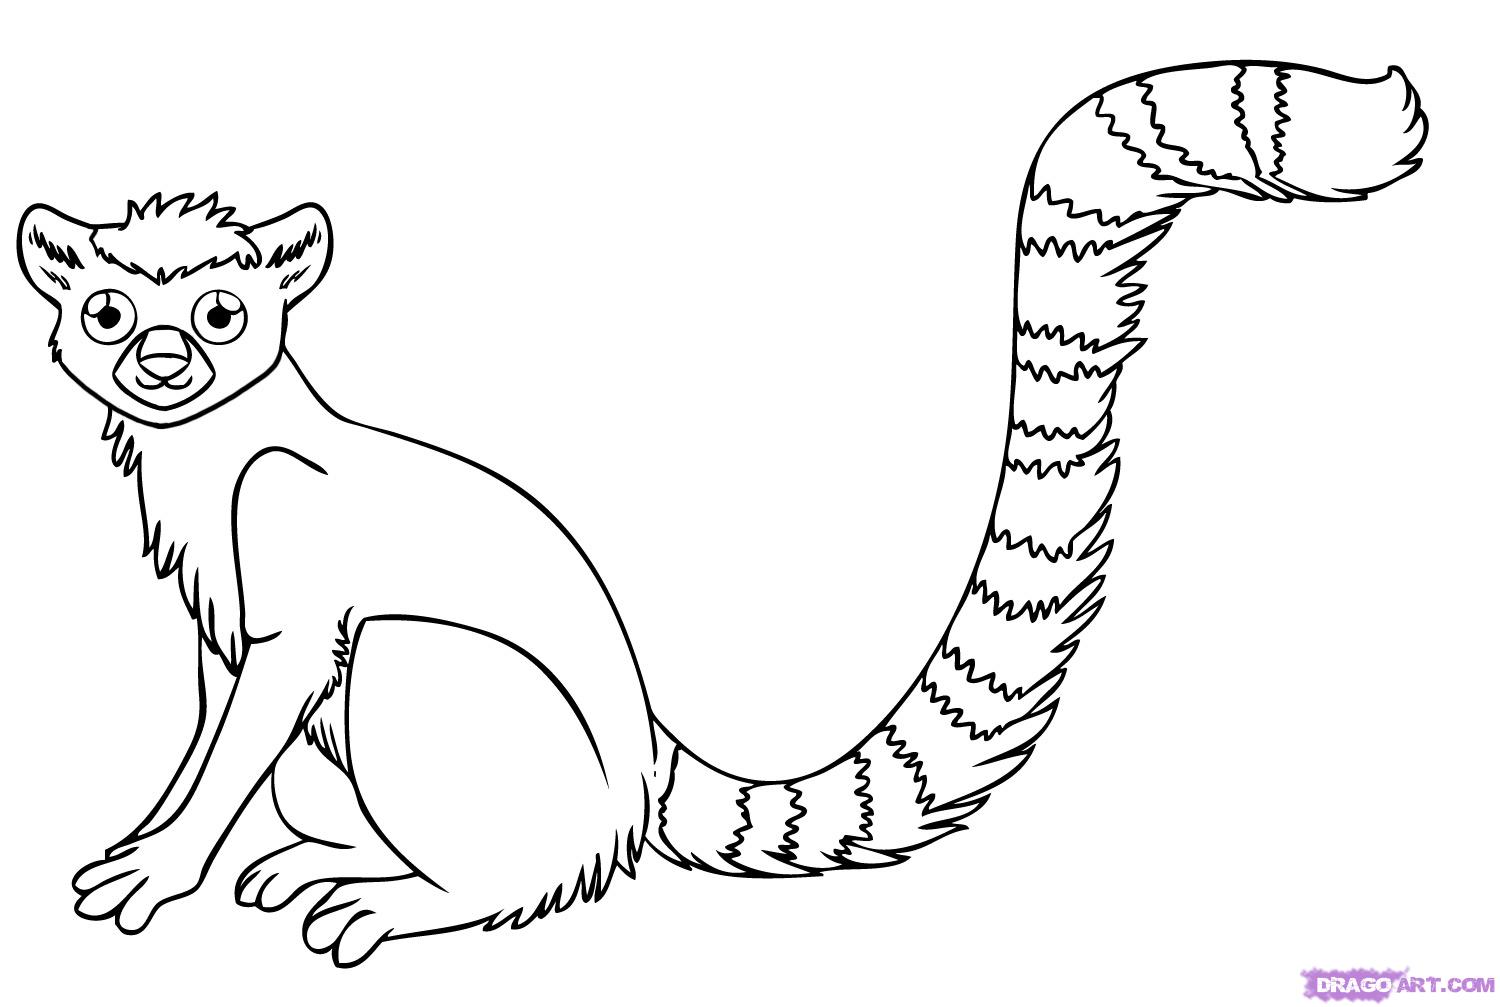 How To Draw A Lemur Step By Step Rainforest Animals Animals Free